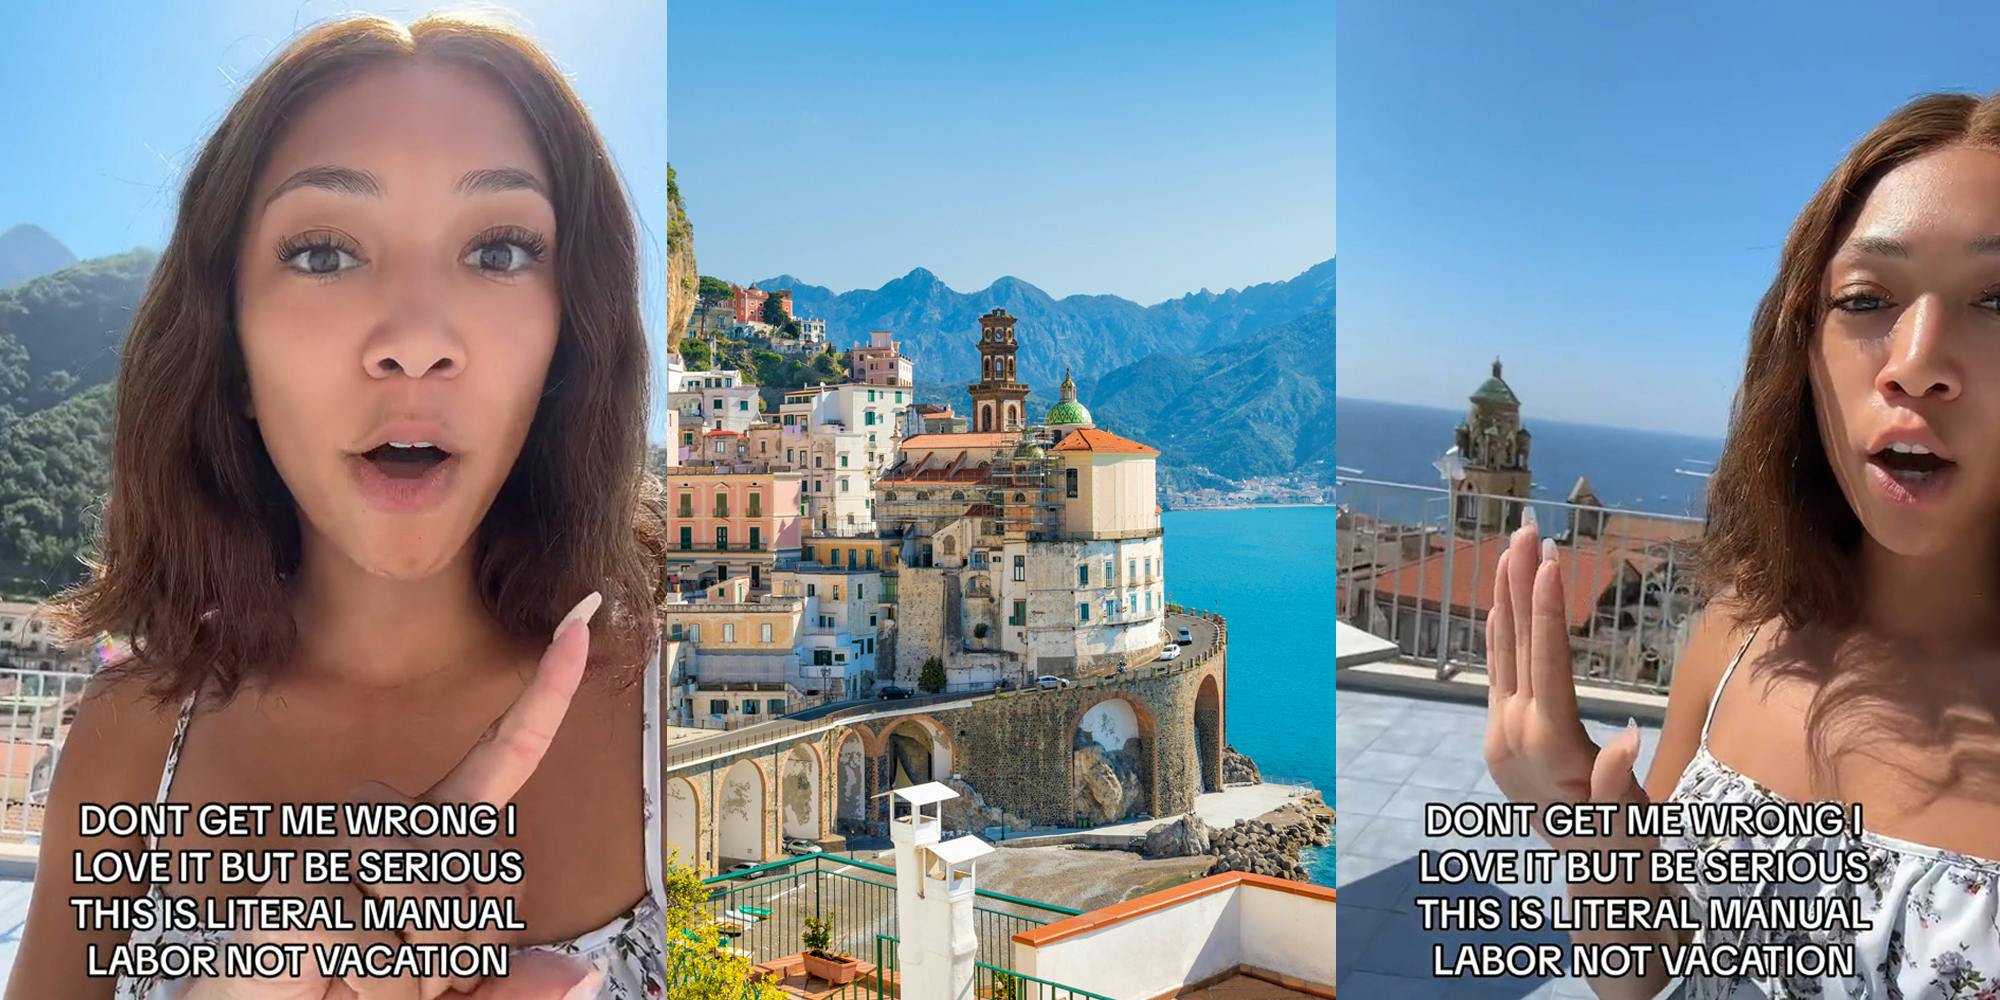 travel influencer speaking outside with caption "DONT GET ME WRONG I LOVE IT BUT BE SERIOUS THIS IS LITERAL MANUAL LABOR NOT VACATION" (l) Amalfi Coast with small city (c) travel influencer speaking outside with caption "DONT GET ME WRONG I LOVE IT BUT BE SERIOUS THIS IS LITERAL MANUAL LABOR NOT VACATION" (r)